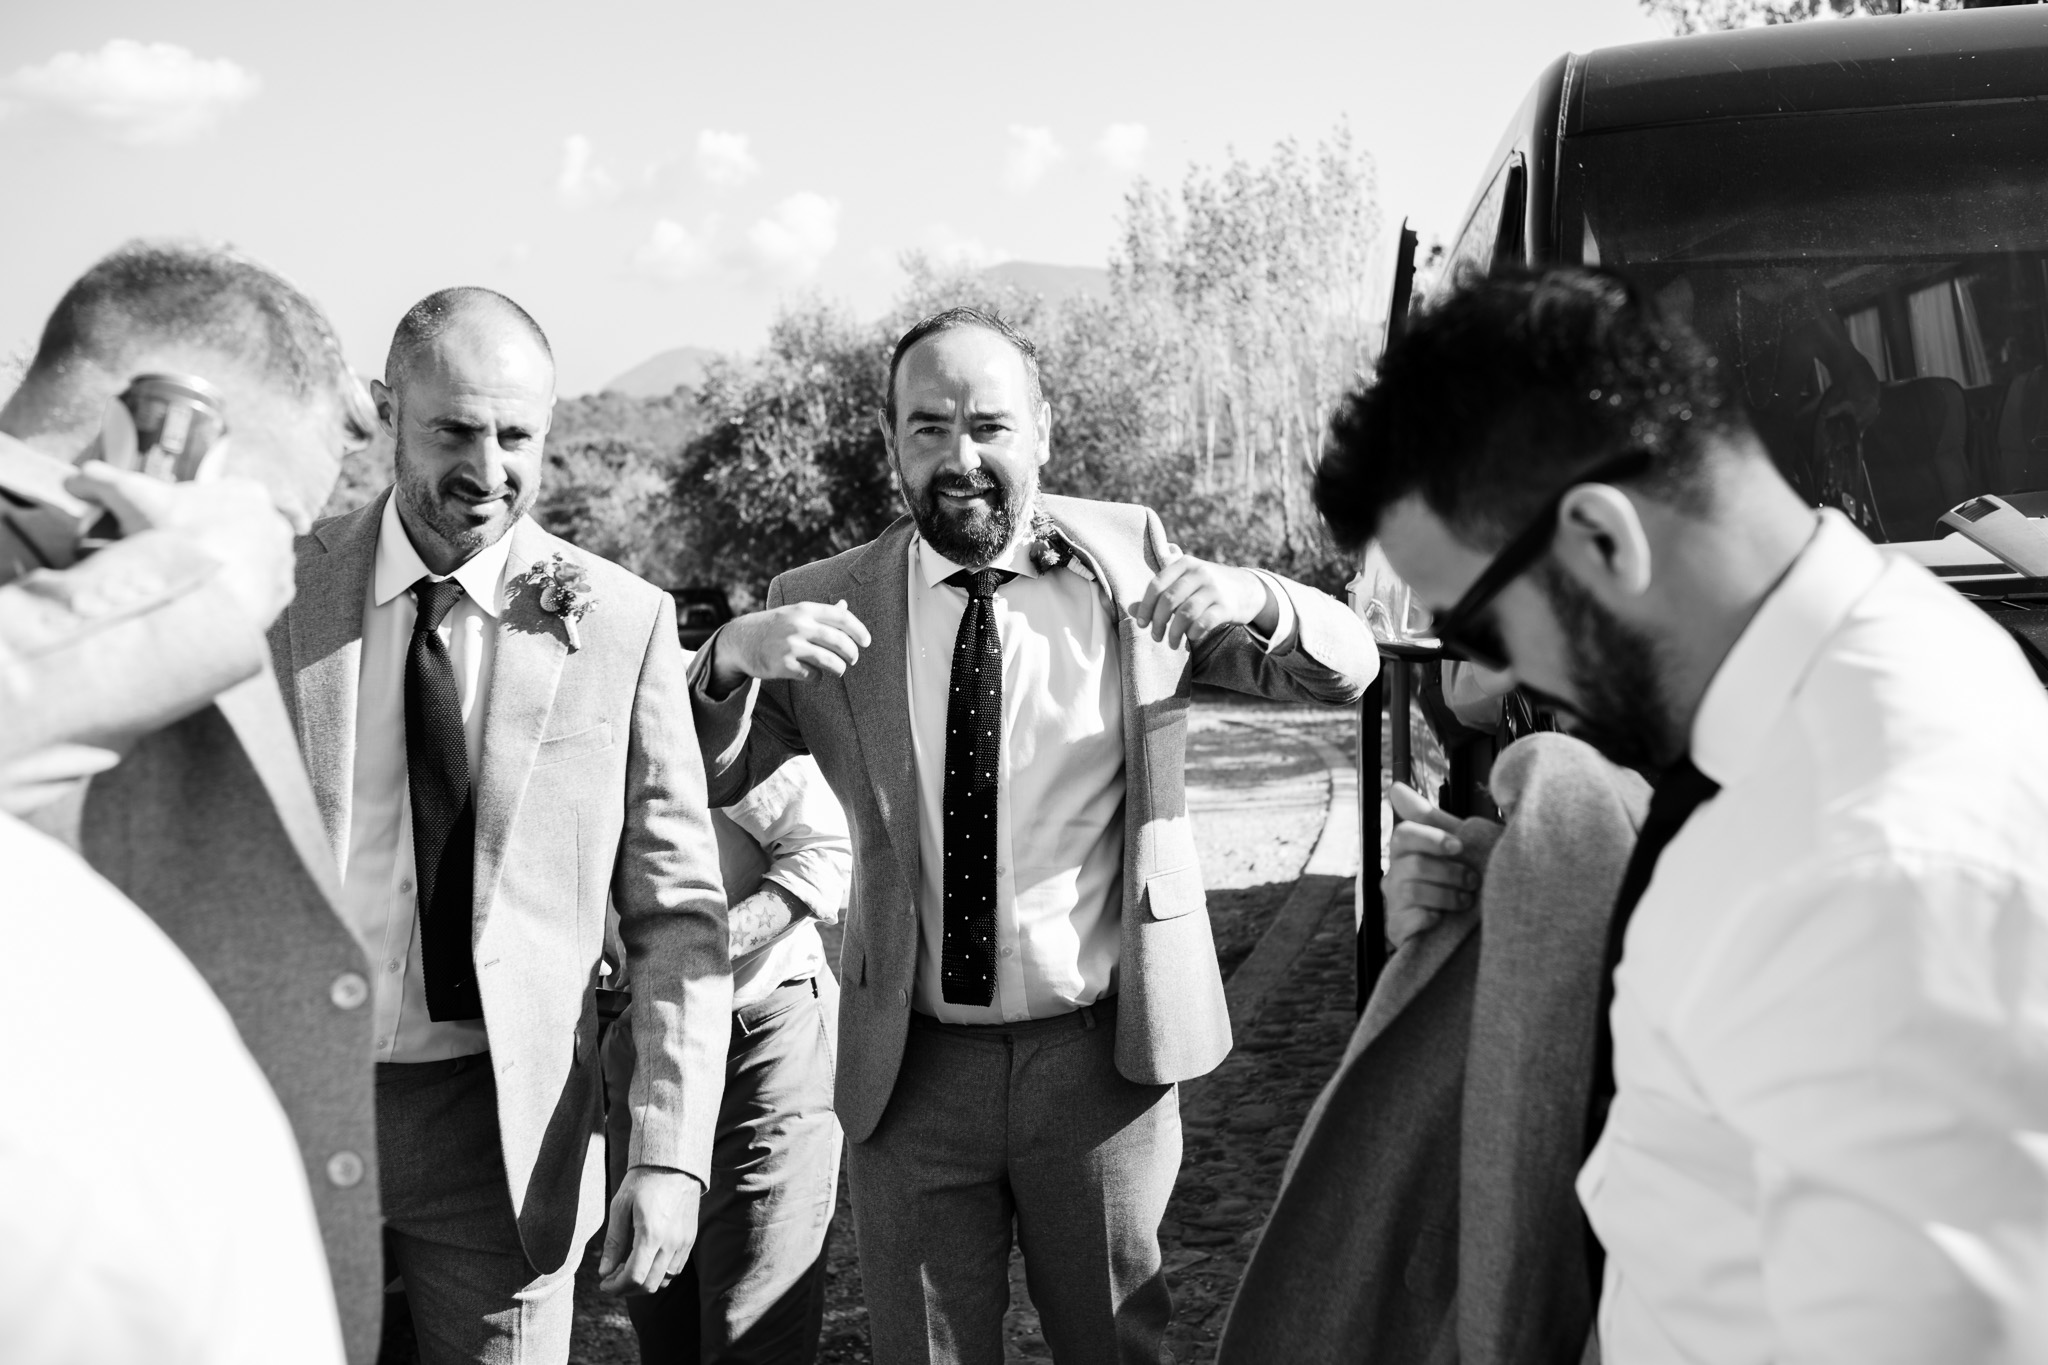 Tom and the groomsmen put their suit jackets on as they arrive at Ambelonas Vineyard.